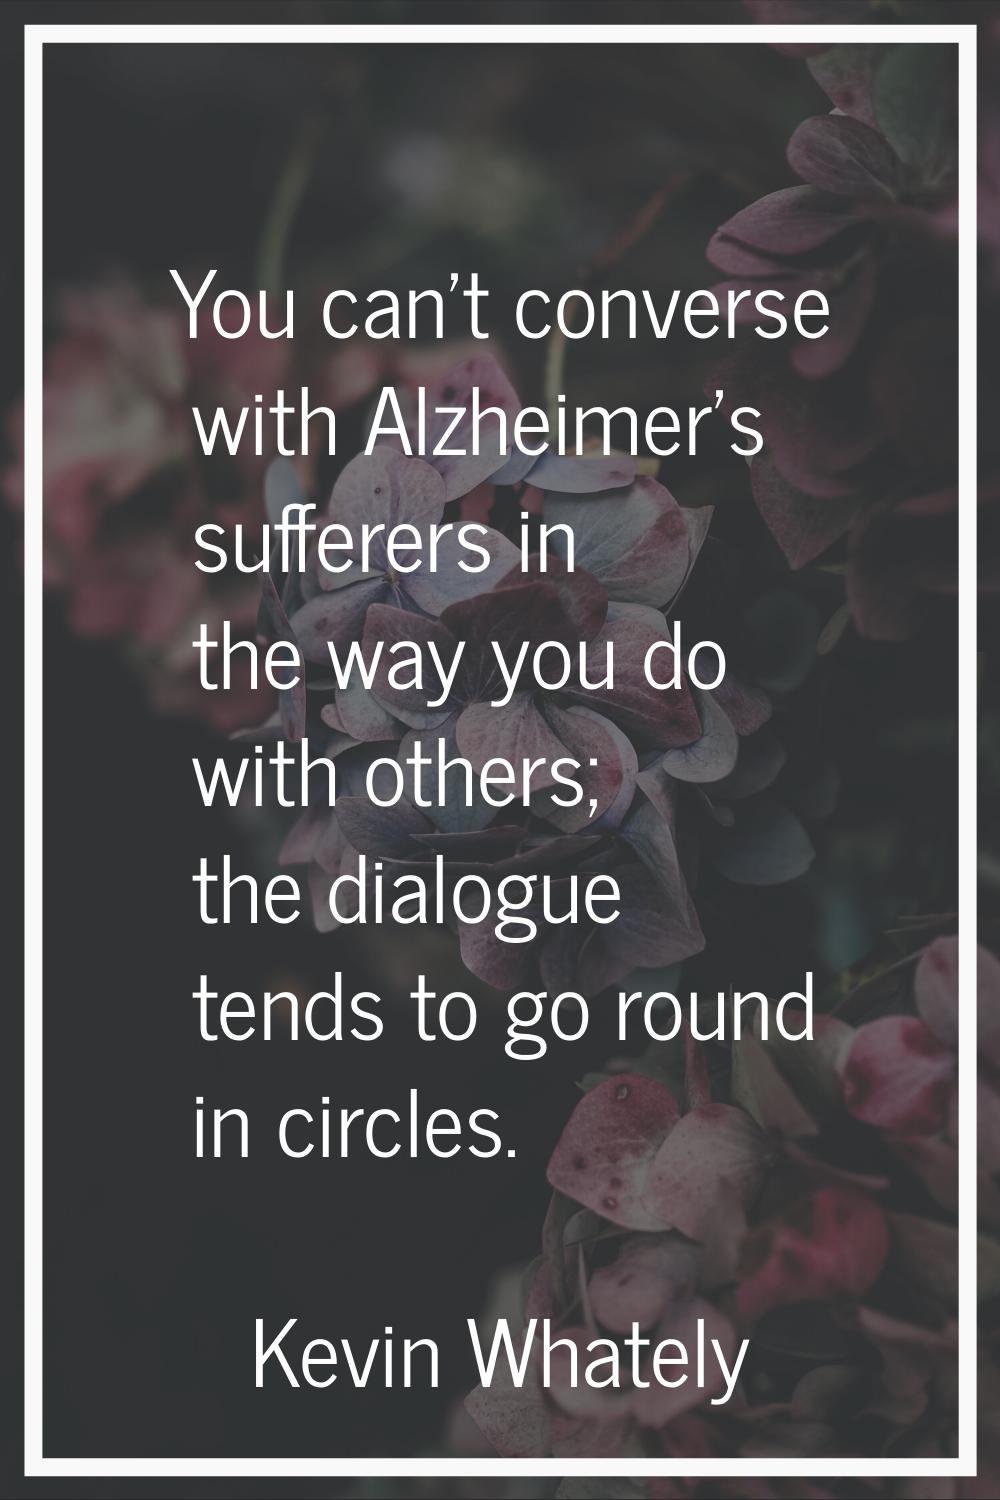 You can't converse with Alzheimer's sufferers in the way you do with others; the dialogue tends to 